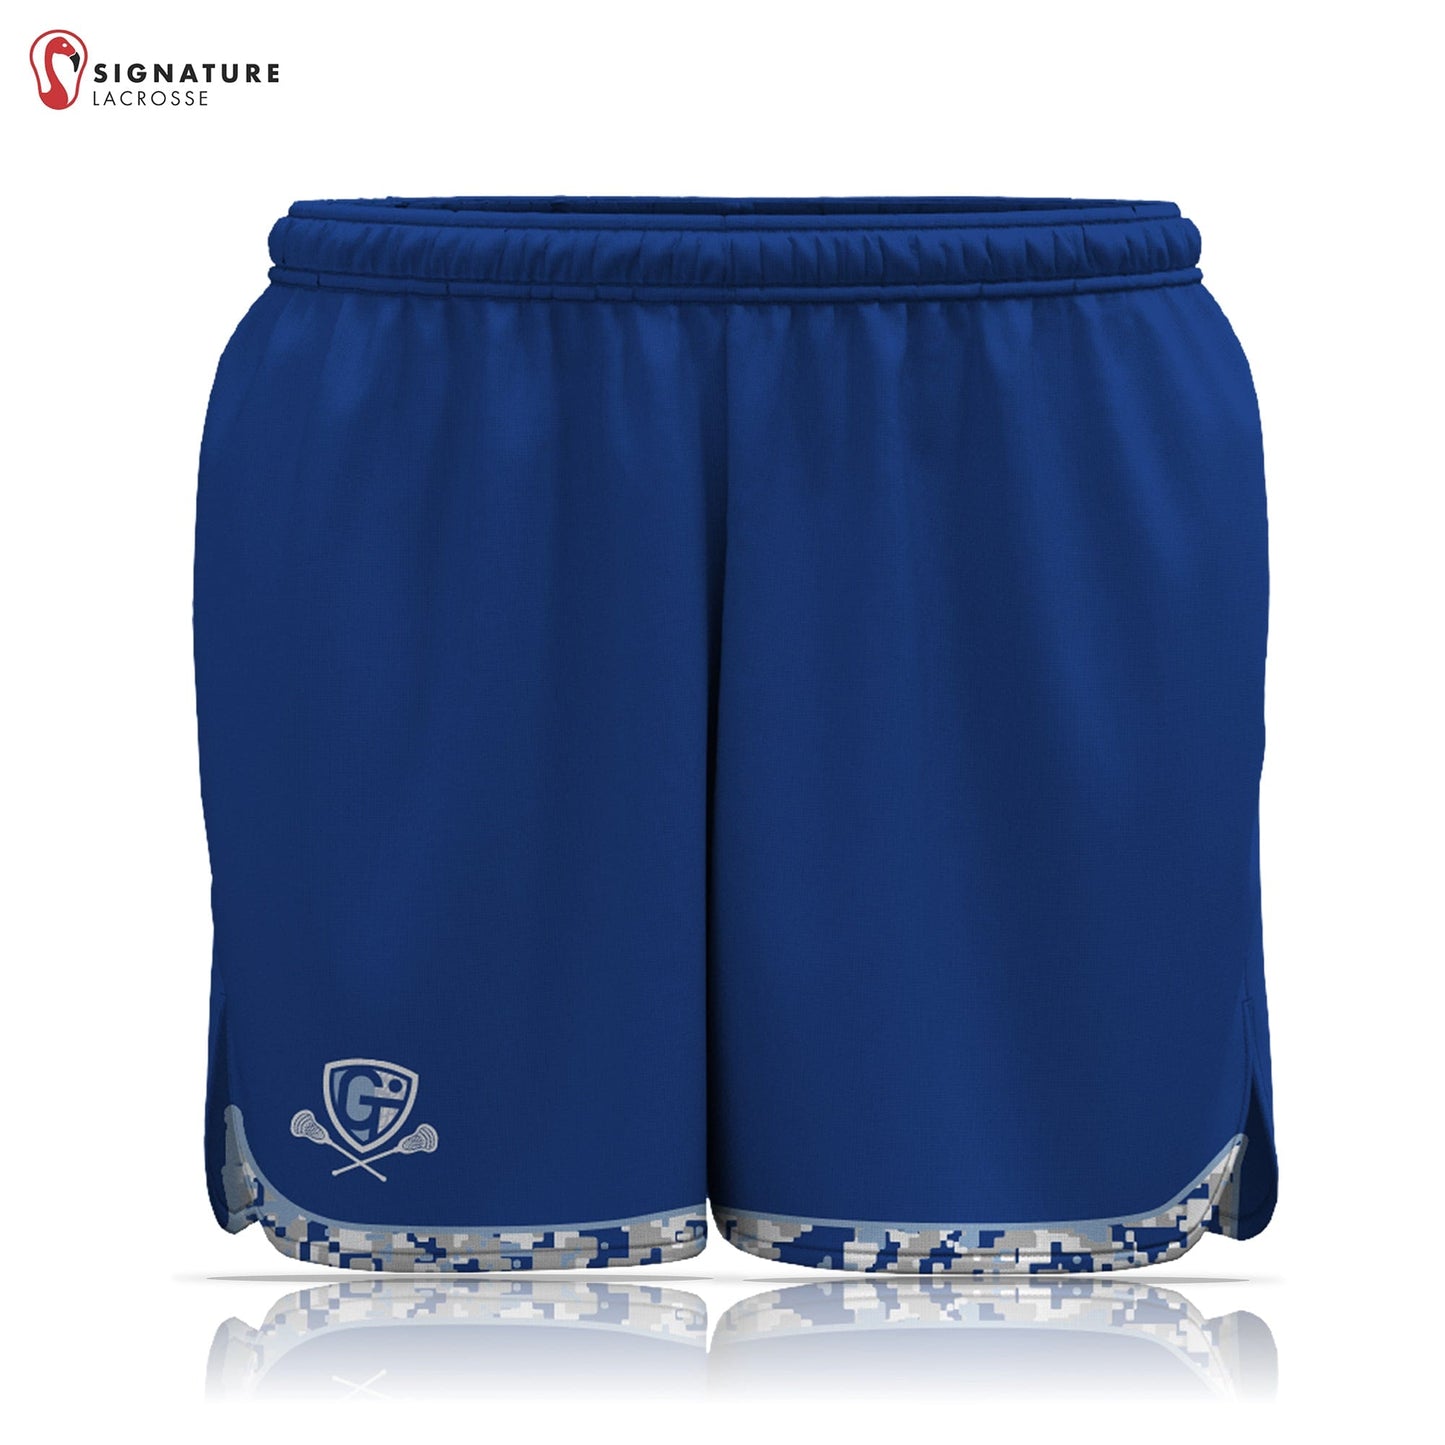 Georgetown-Triton Youth Lacrosse Women's Player Game Shorts: 3-4 Signature Lacrosse